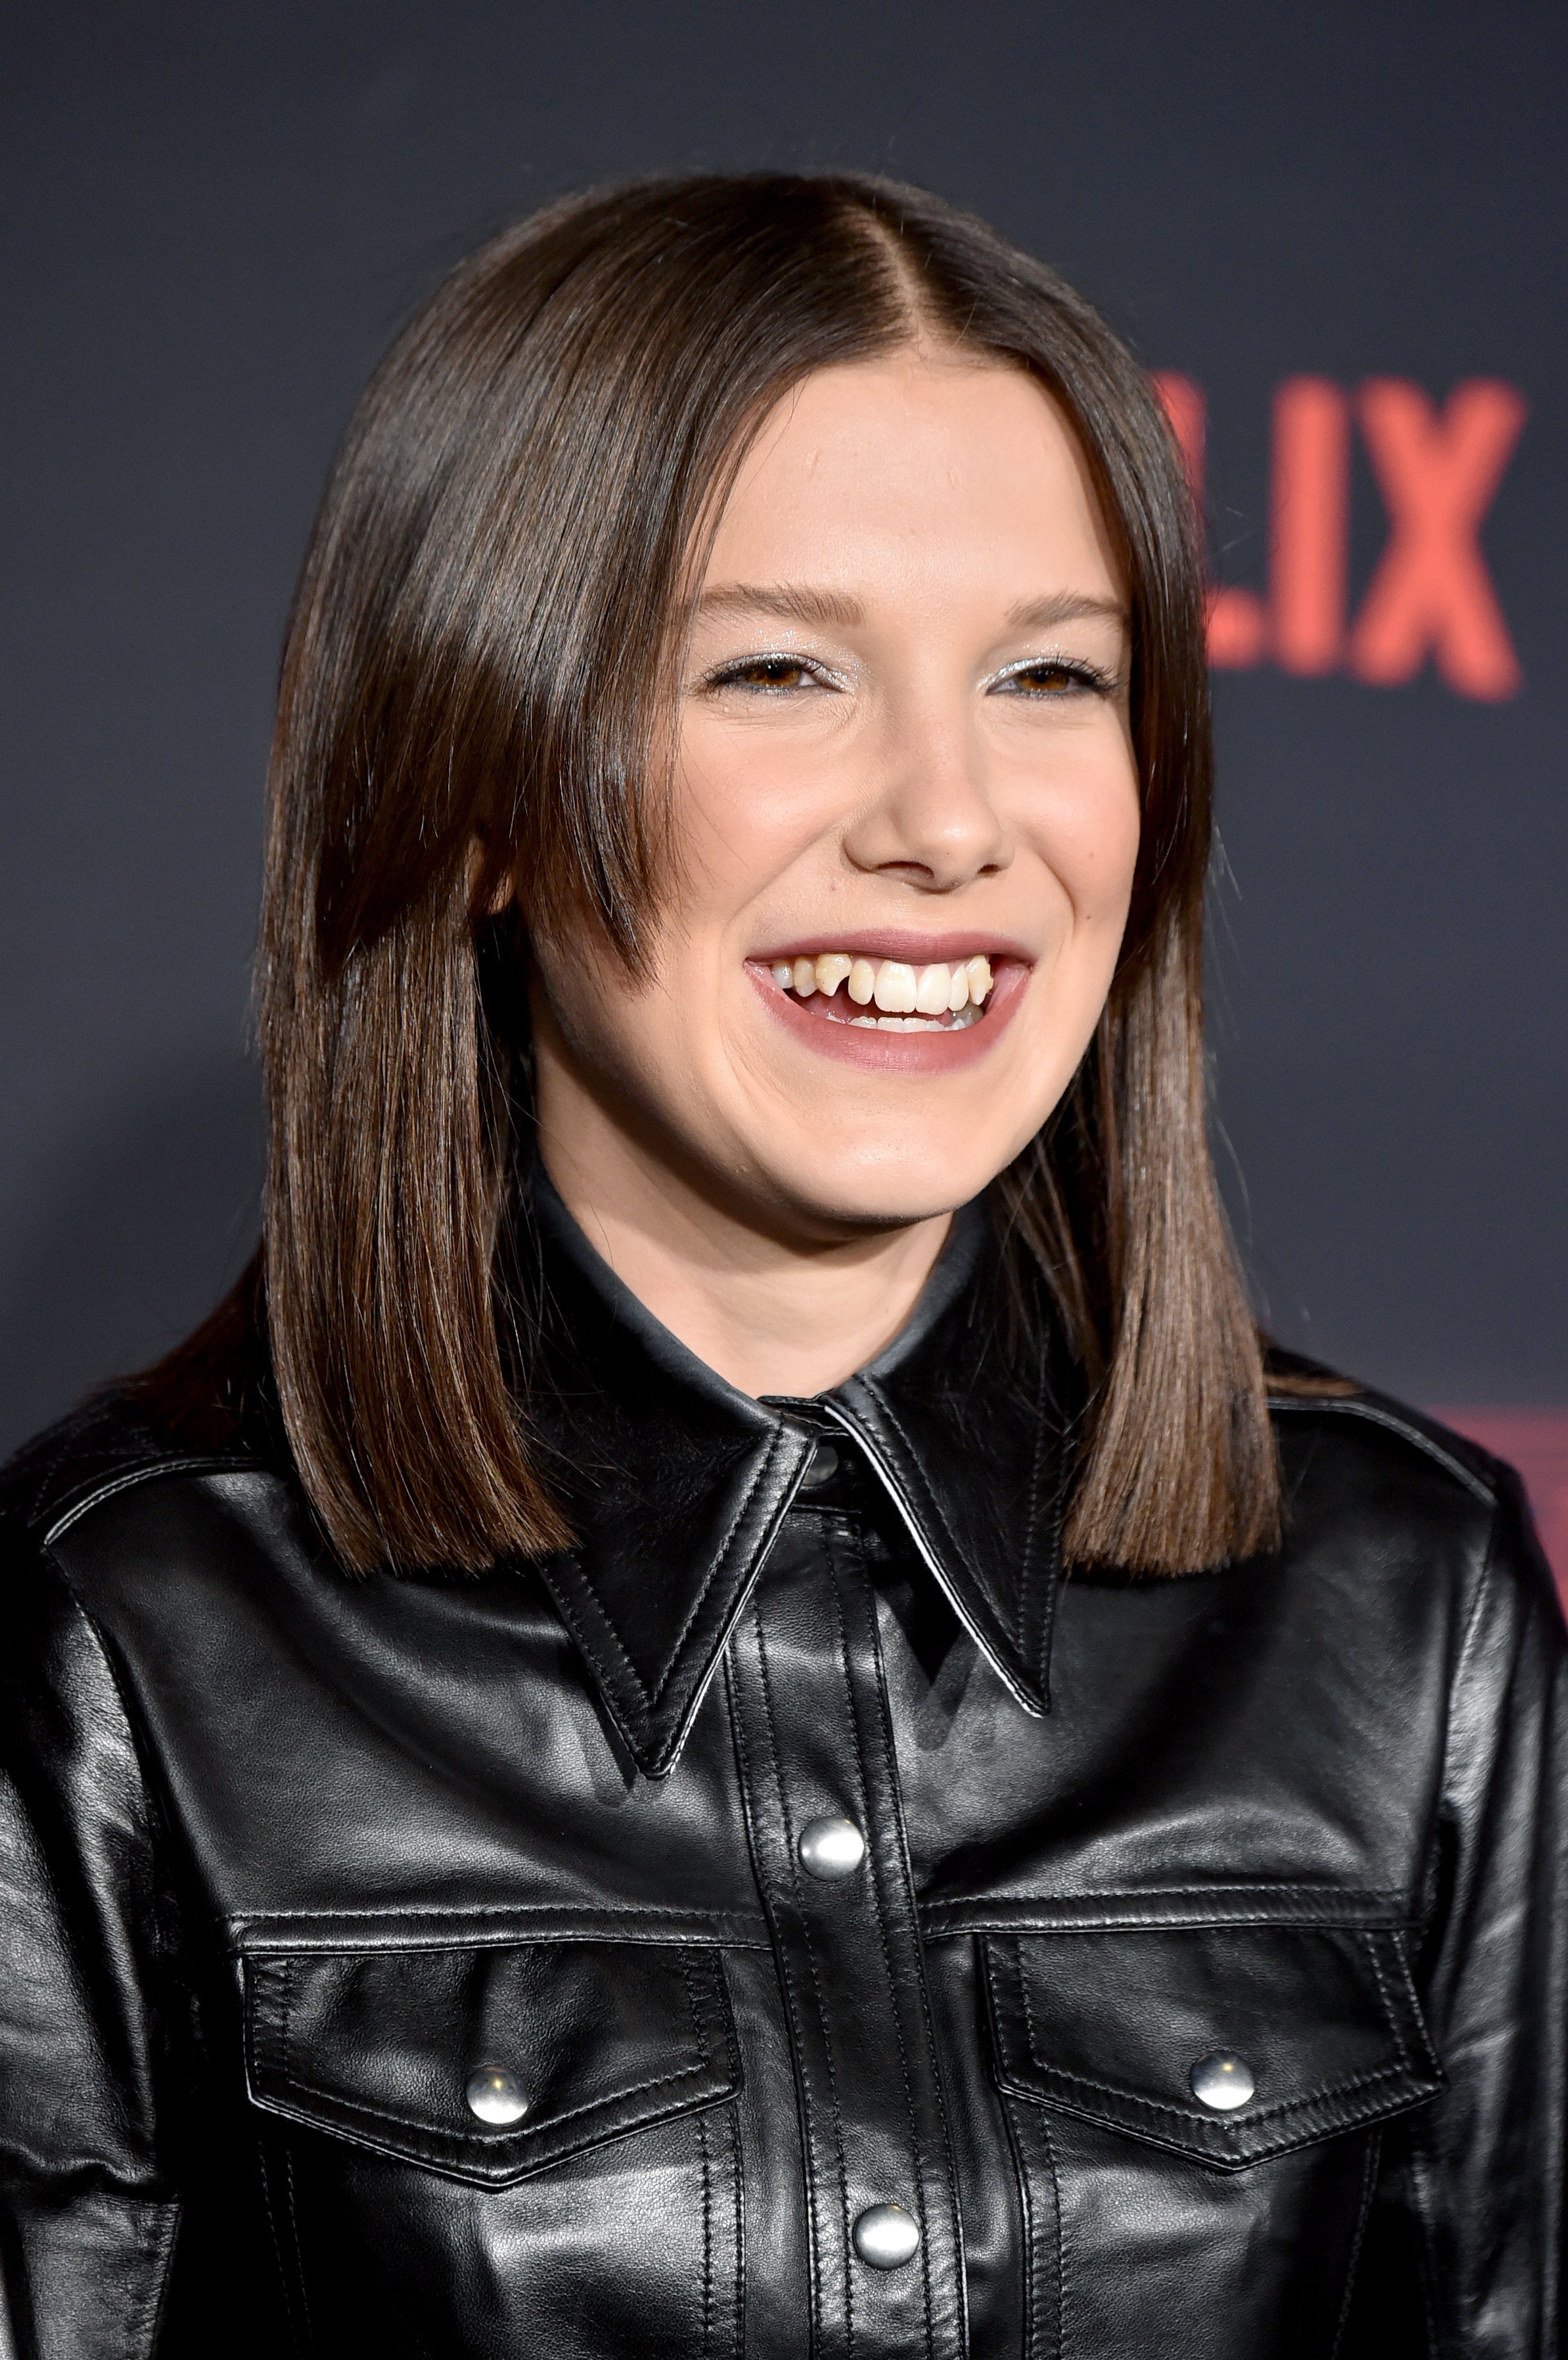 Millie Bobby Brown Debuts New Long Brown Do Laughs At Funny Stranger